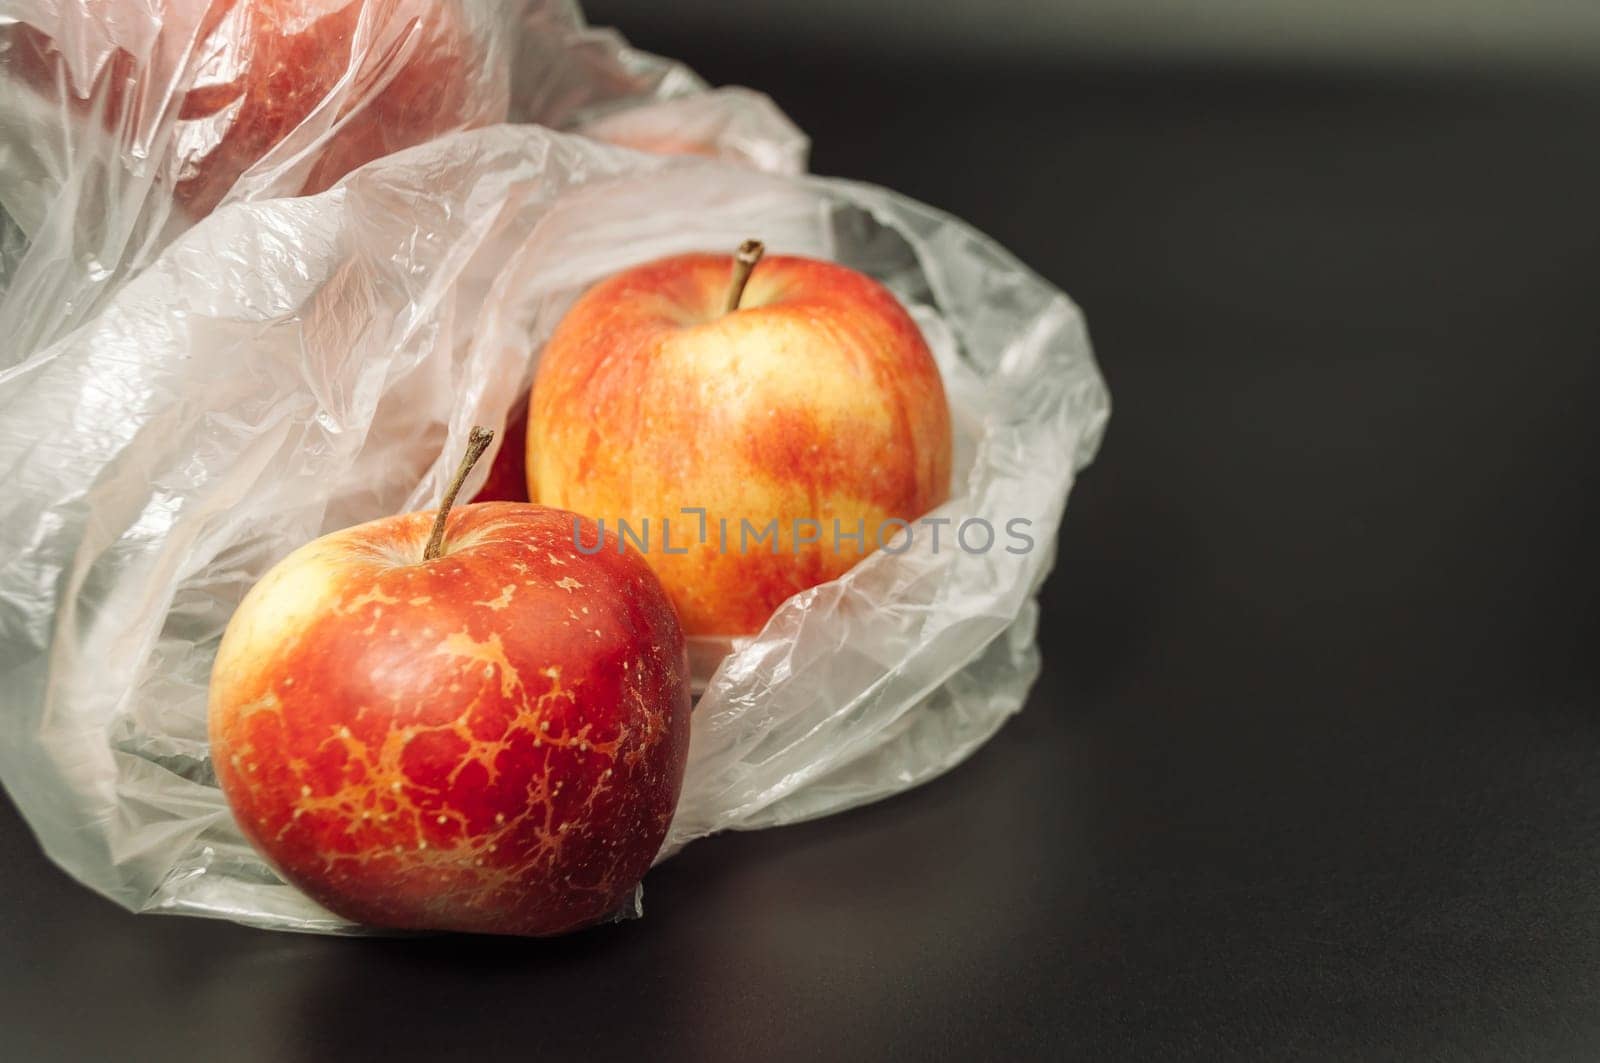 Two apples are in a plastic bag on a black background by Alla_Morozova93